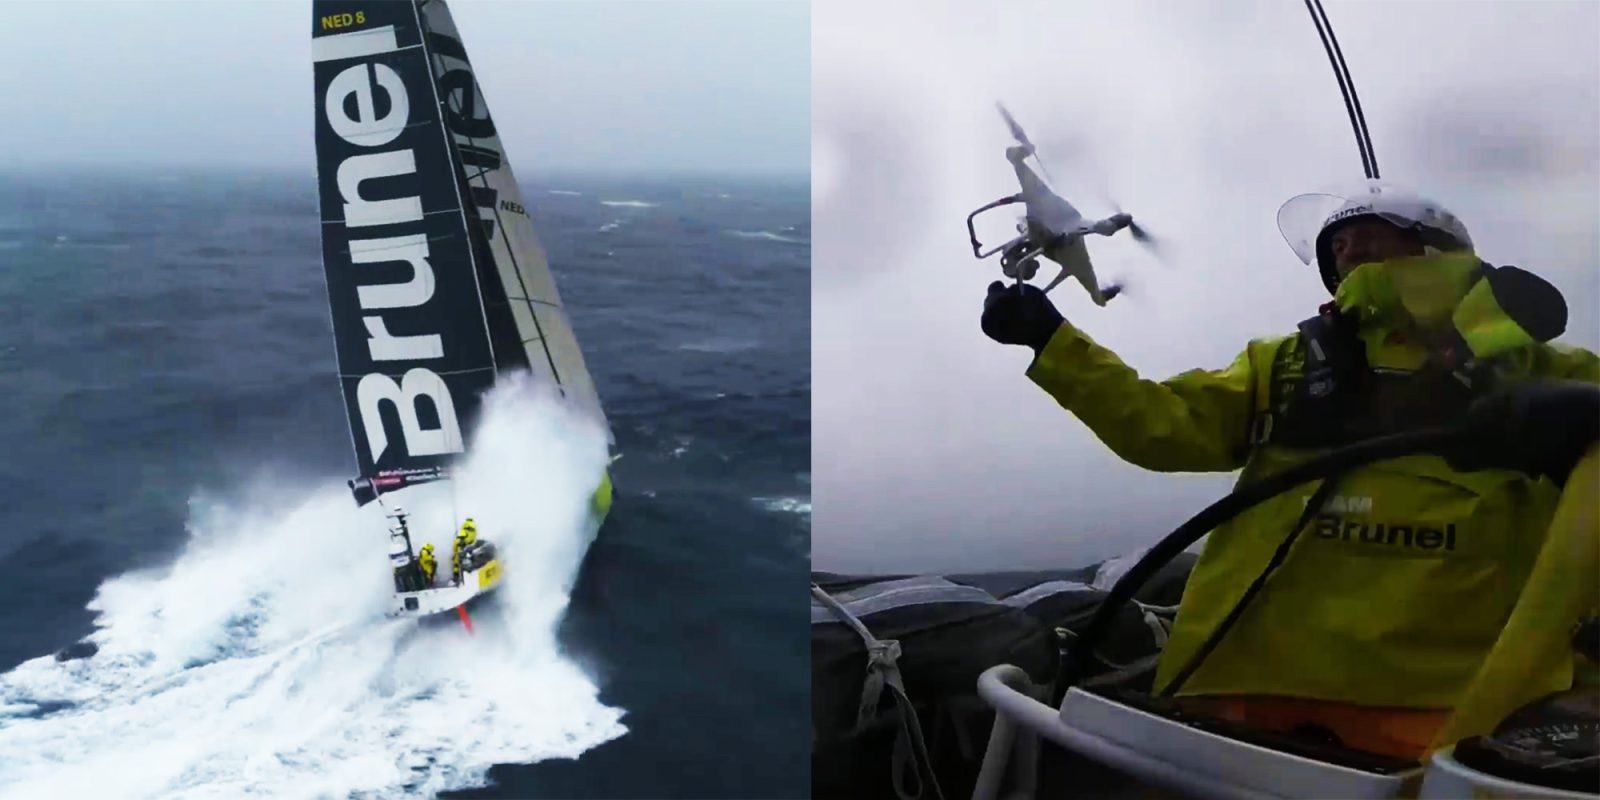 Spectacular drone footage and landing during the record-breaking 9th Leg of the Volvo Ocean Race by Team Brunel [video]